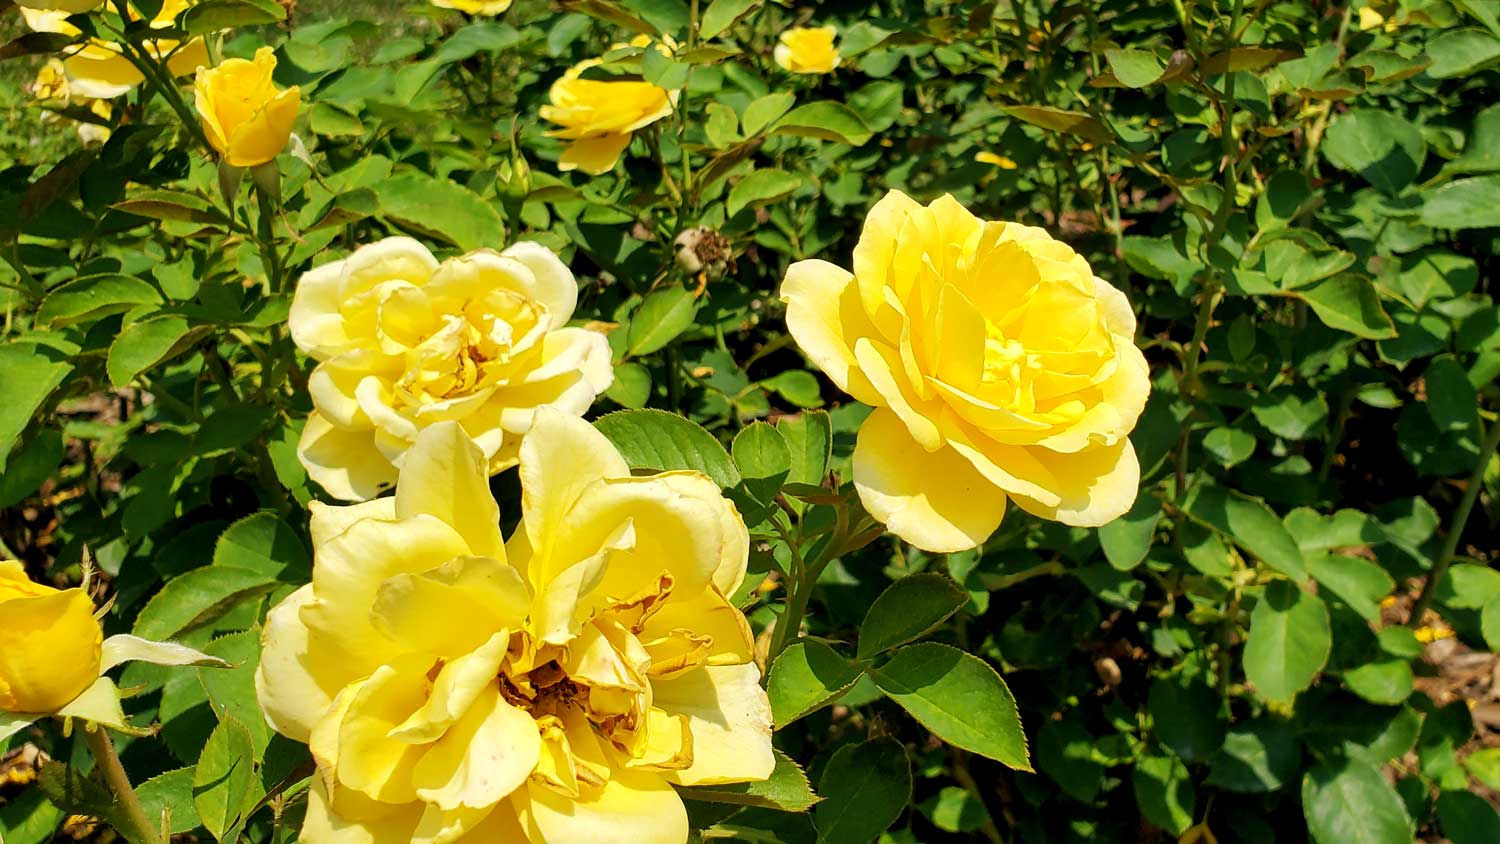 Yellow roses at the Claire and Mile Mills Rose Garden at Greenwood Park, Des Moines, Iowa.